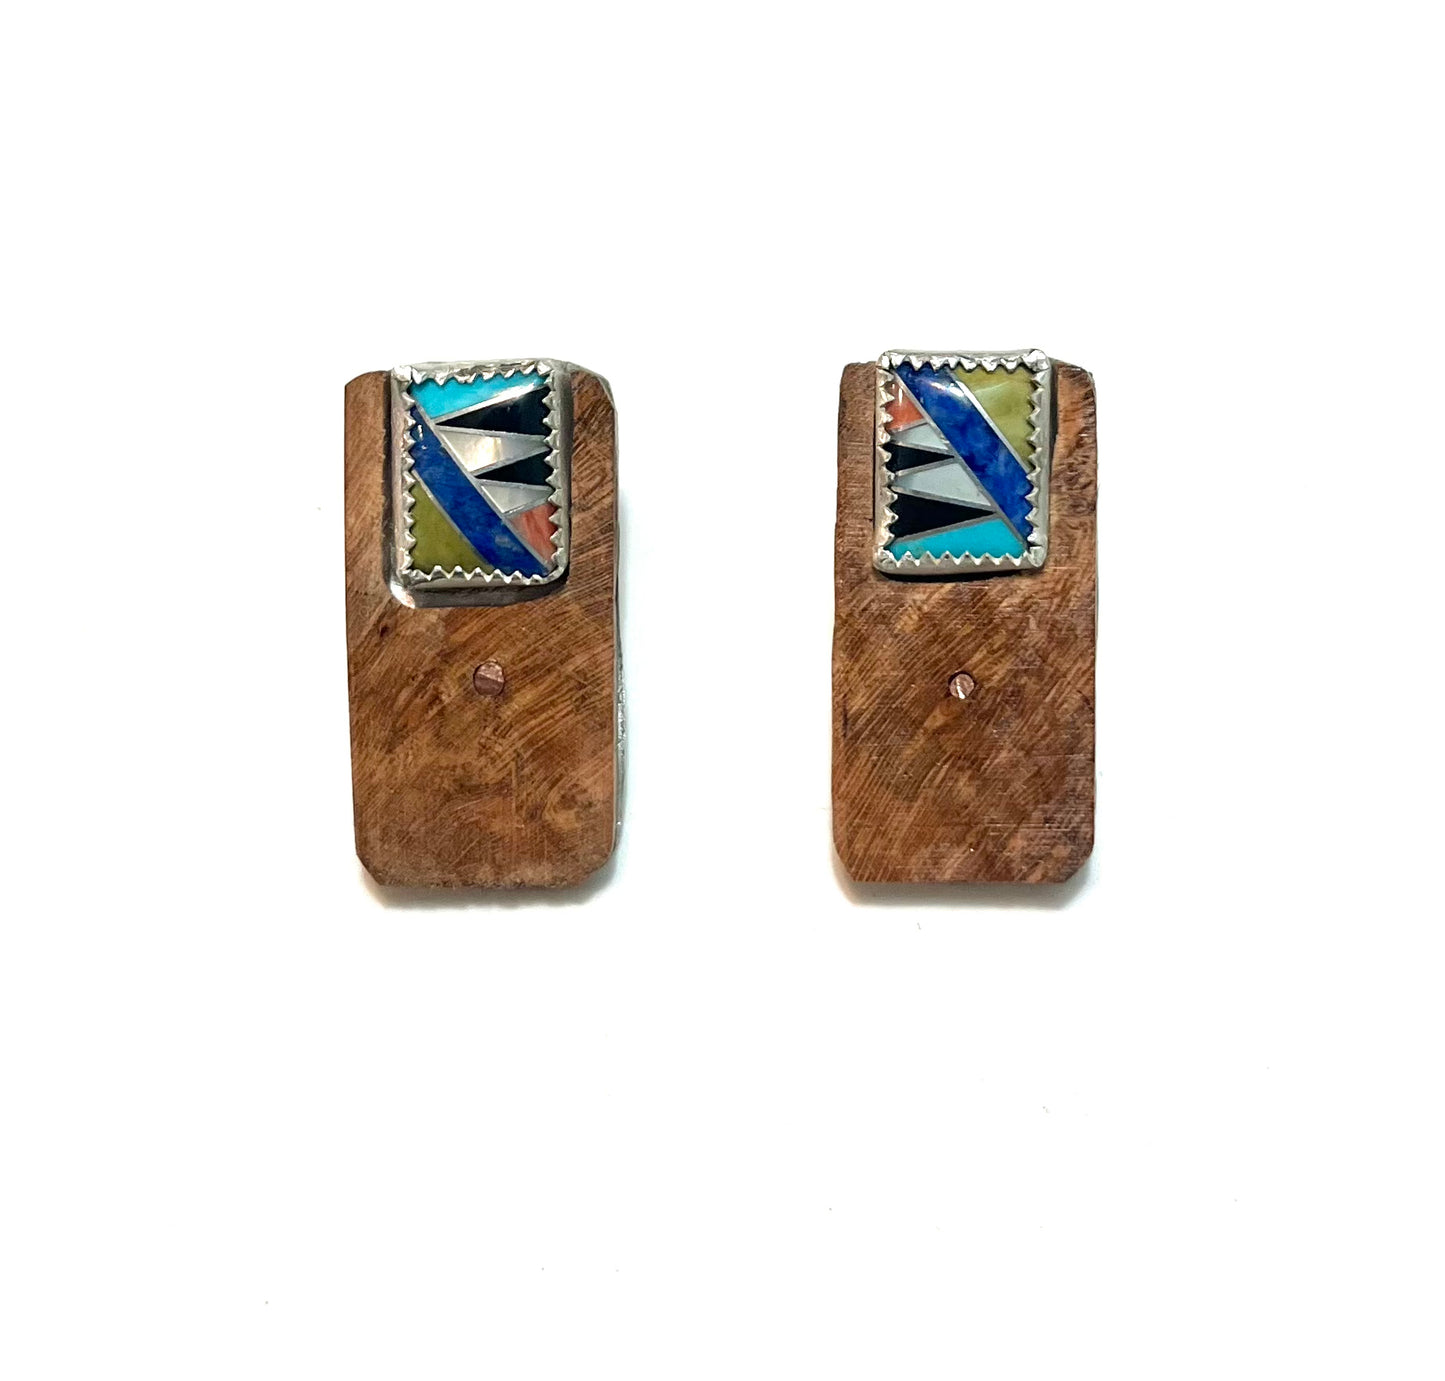 Inlay Stone Earrings with Cherry